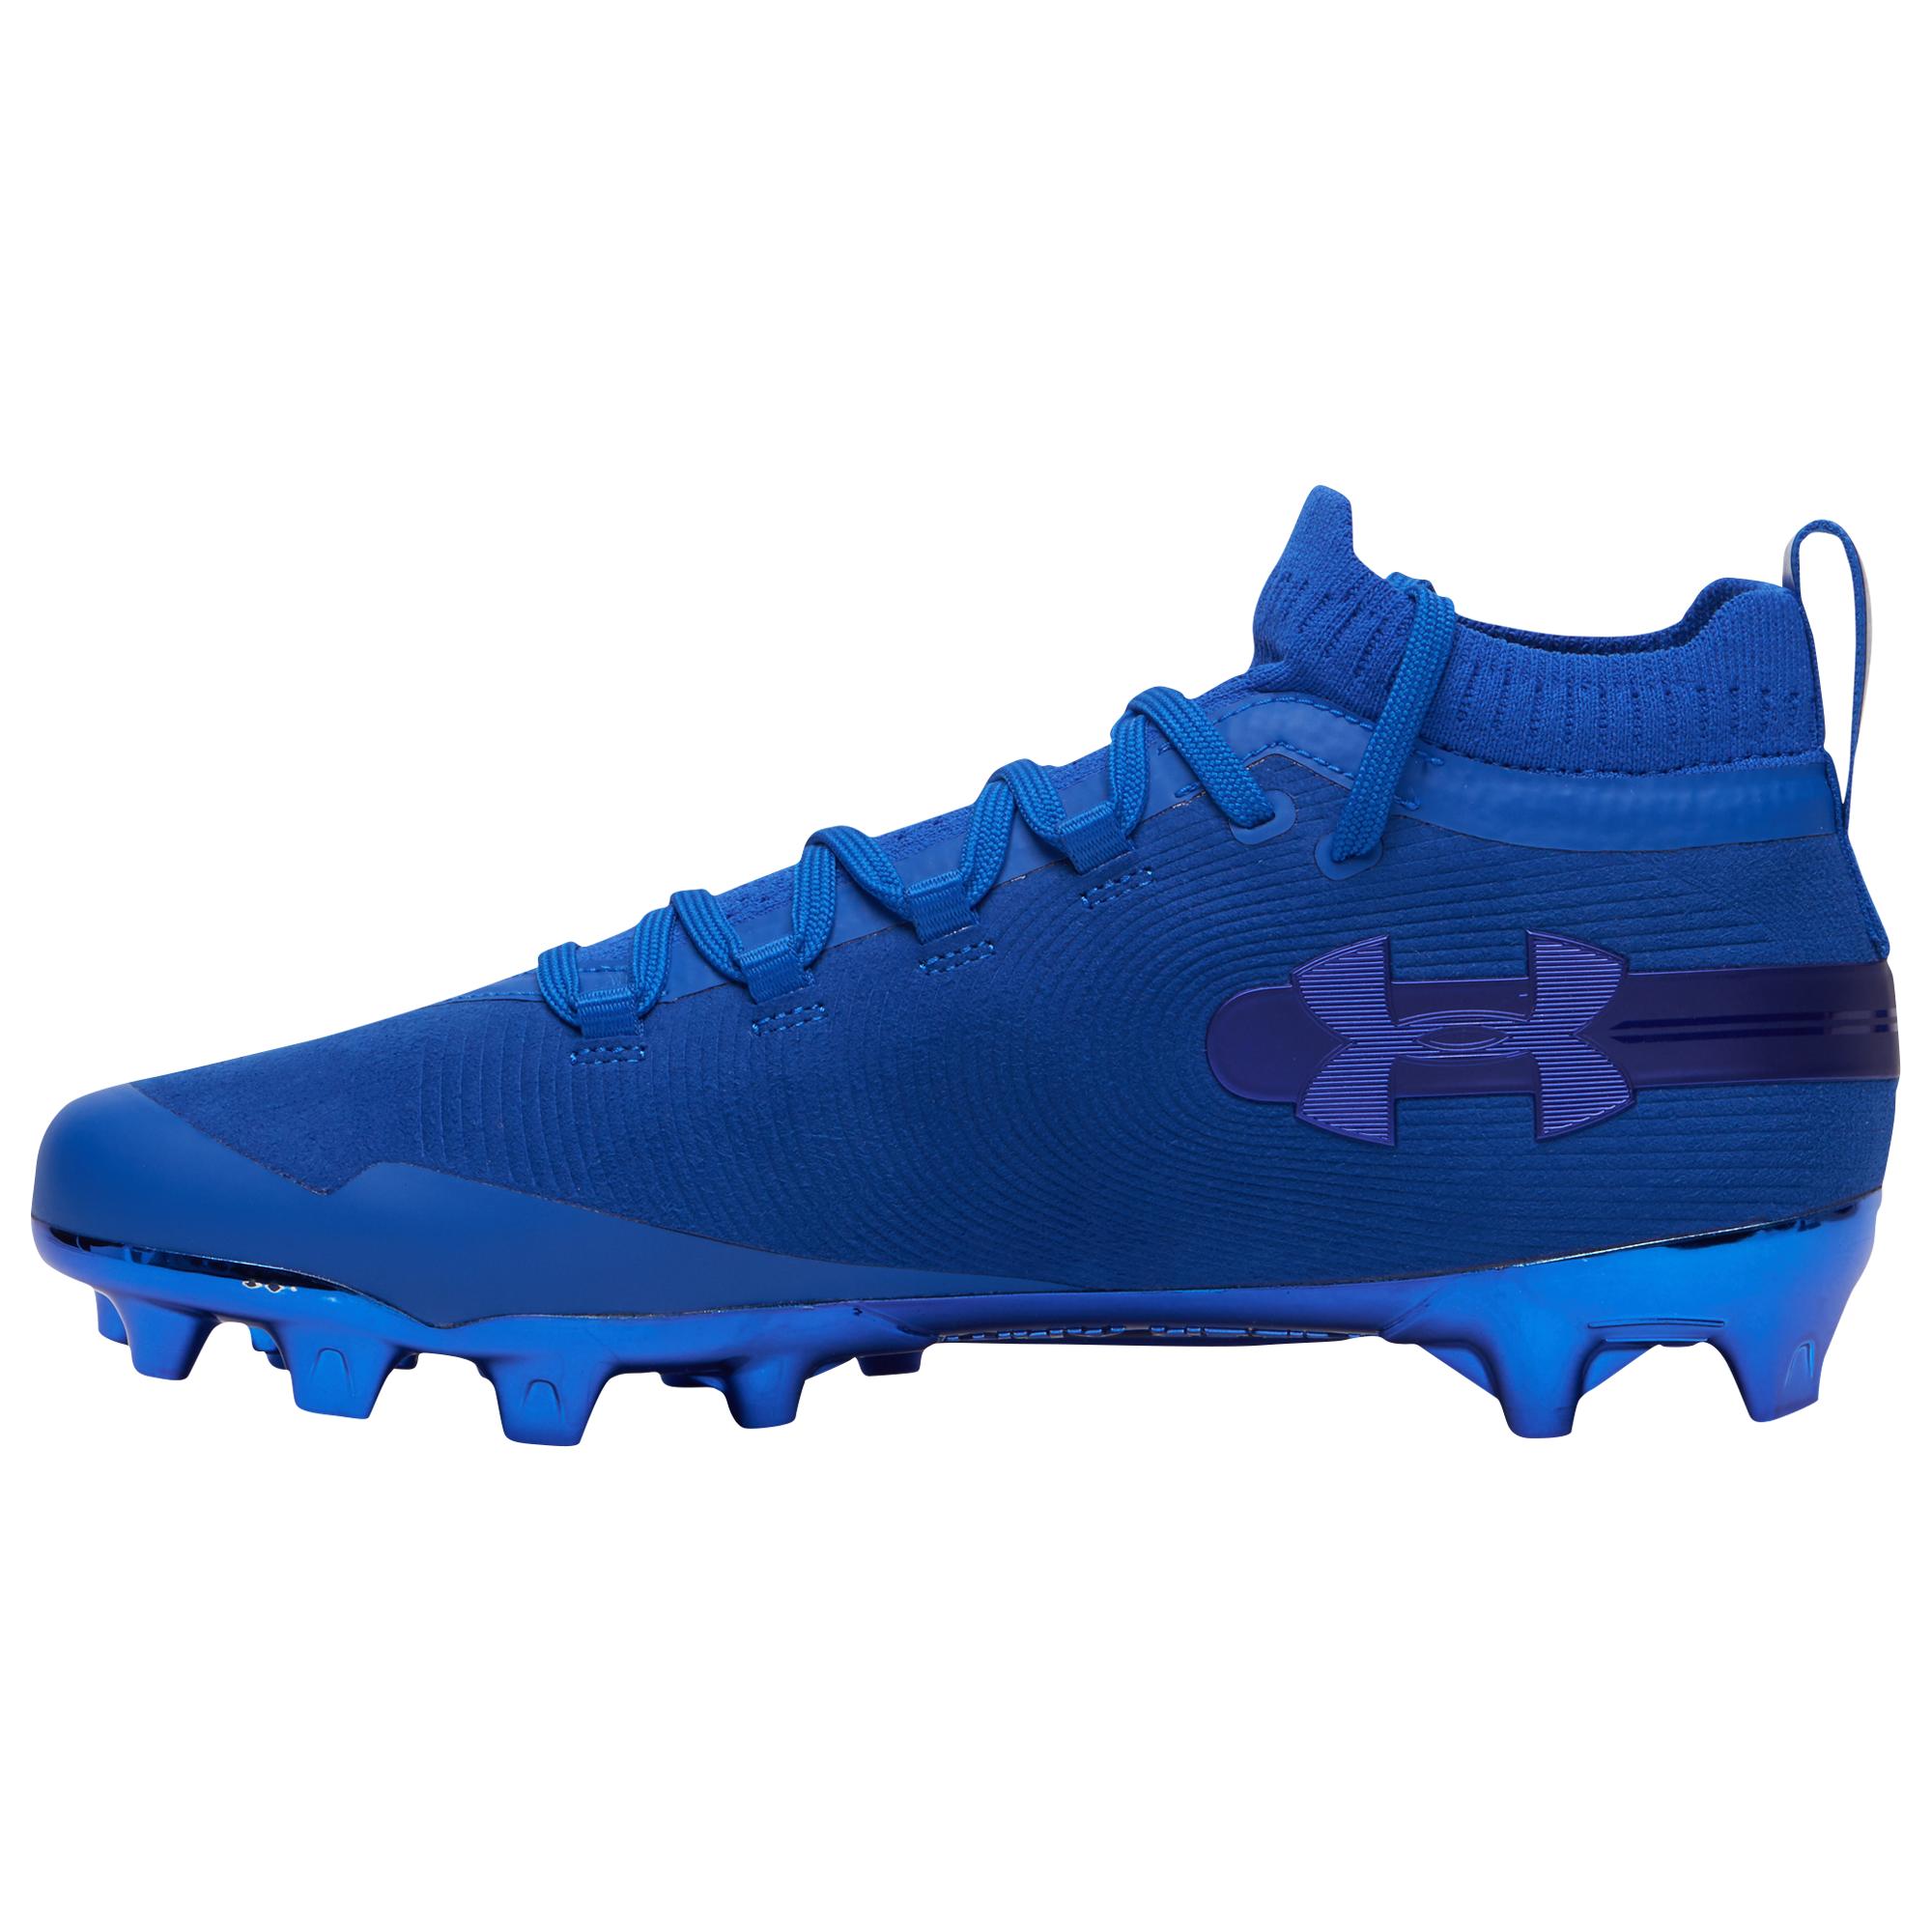 under armour blue suede cleats off 54 